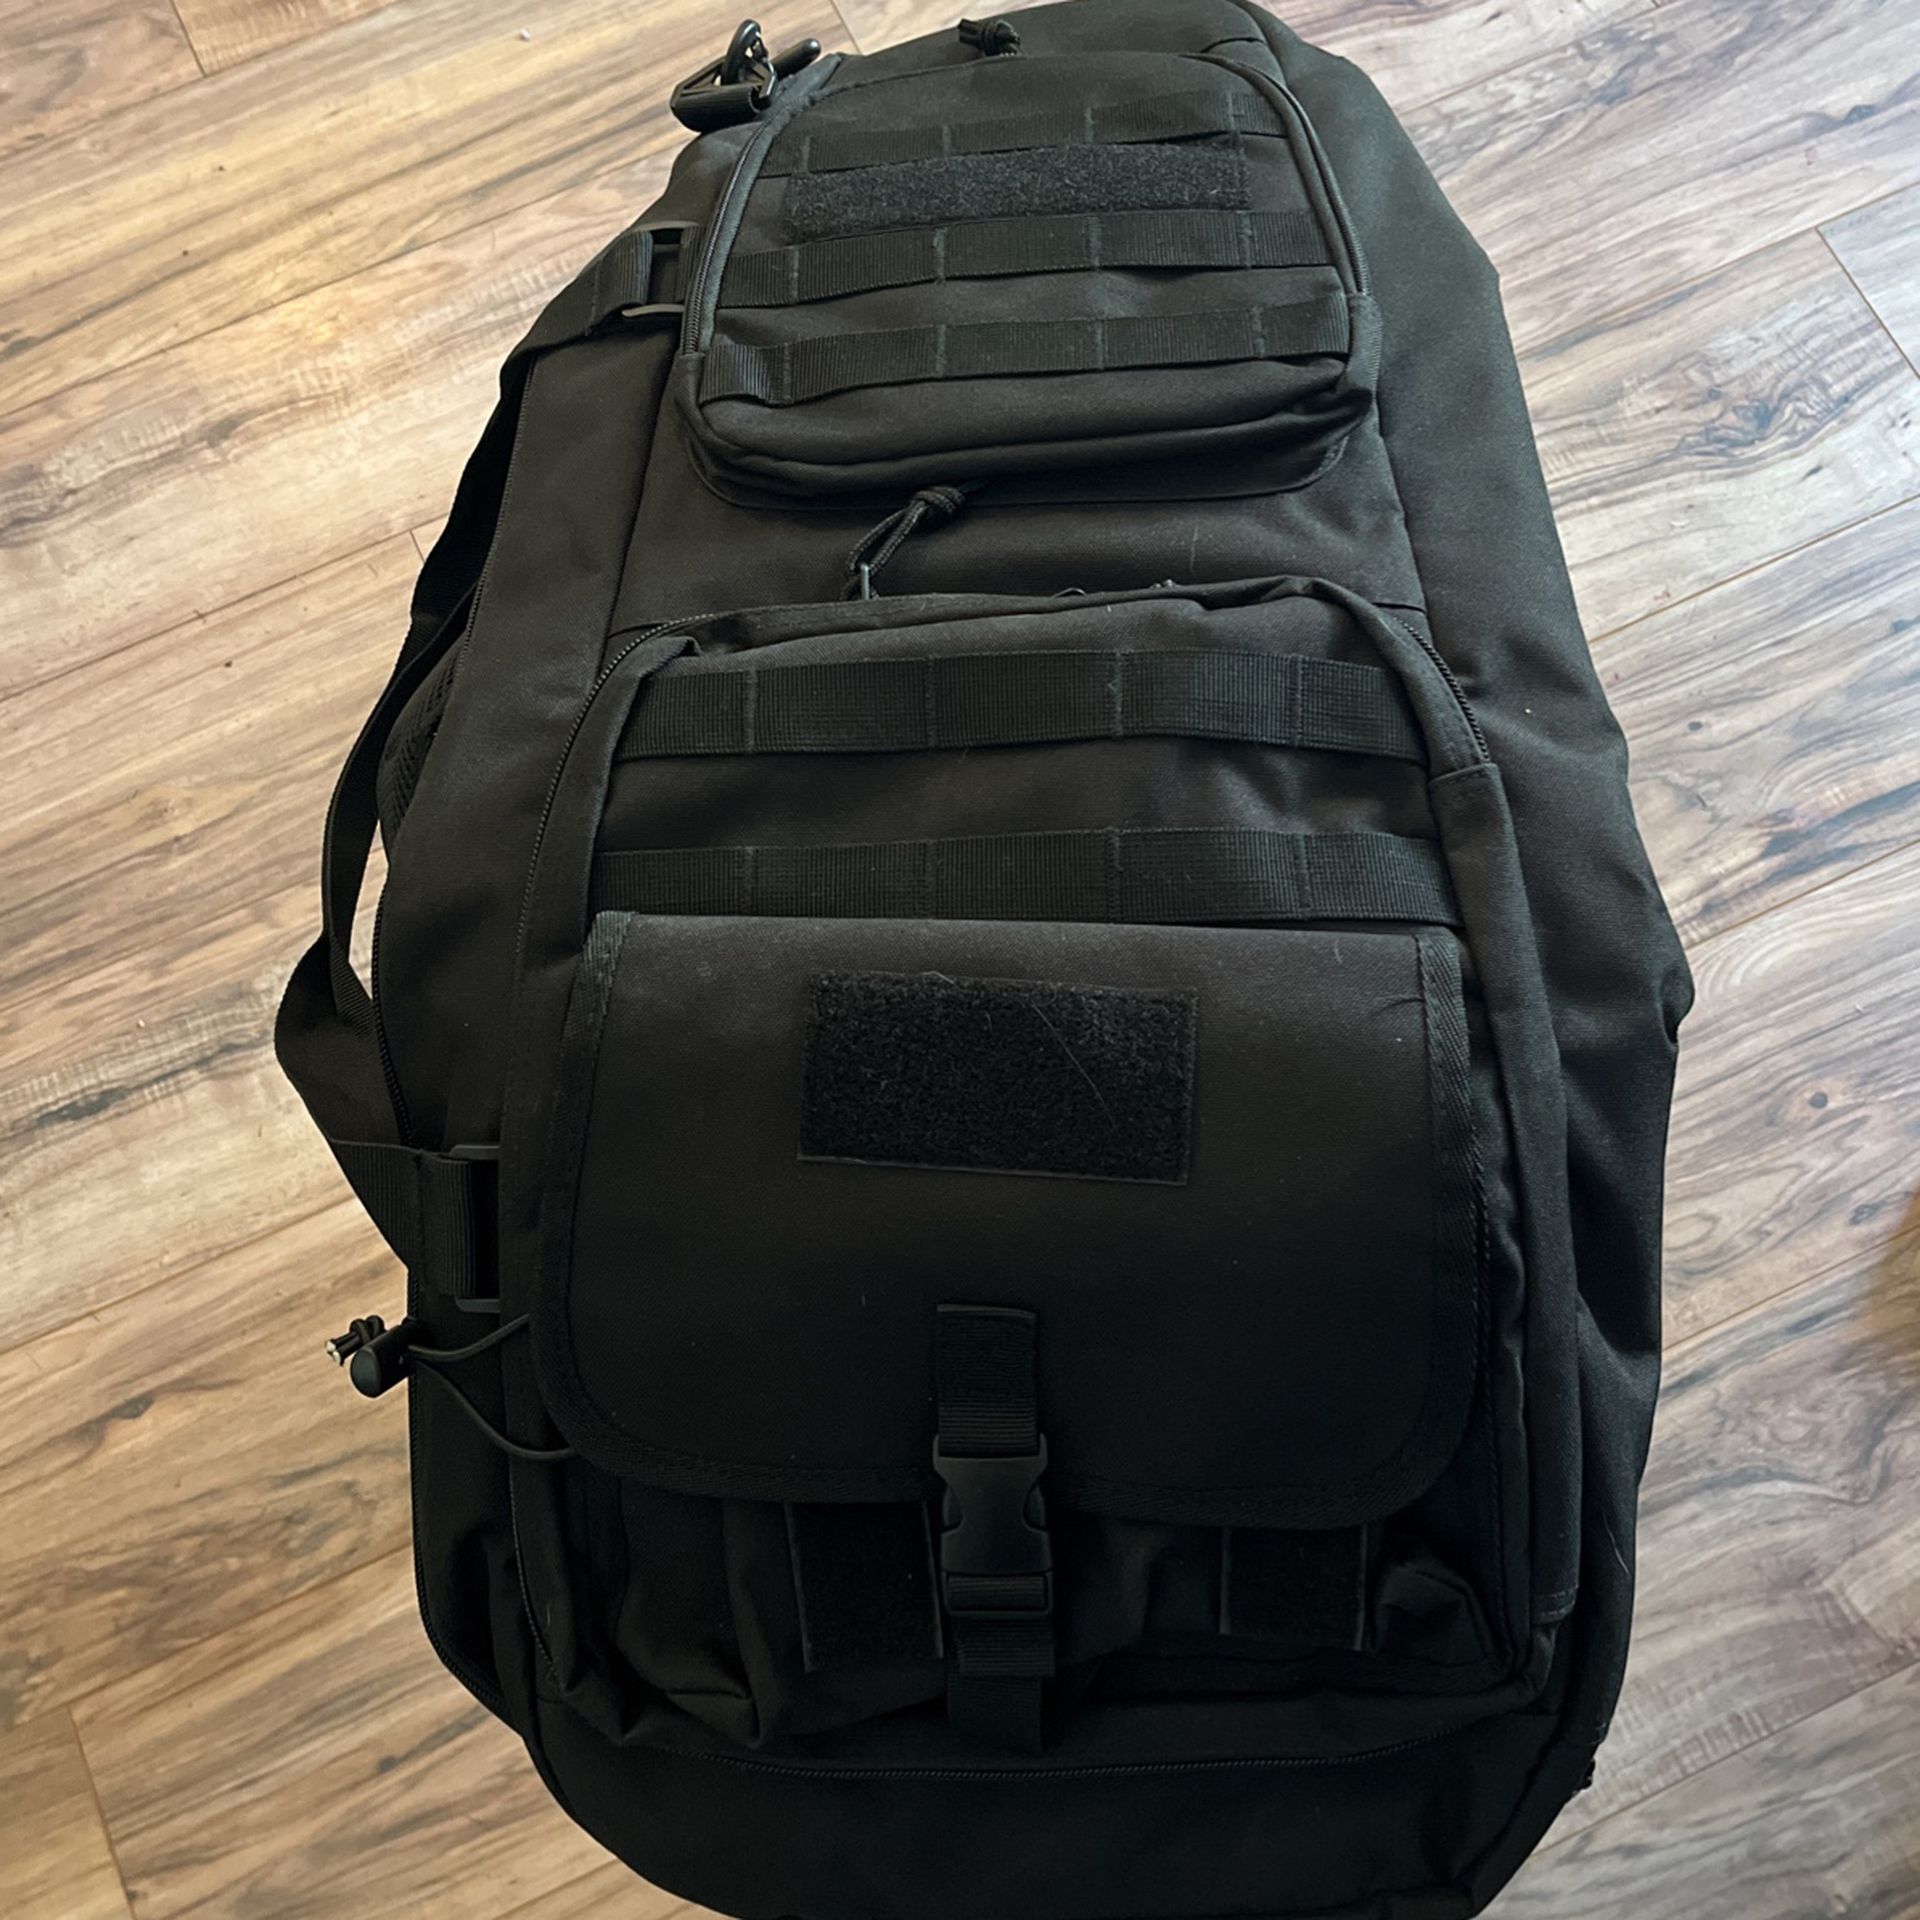 TACTICAL SOFT CAST BACKPACK 30 Inches No Brand Name See All Photos 